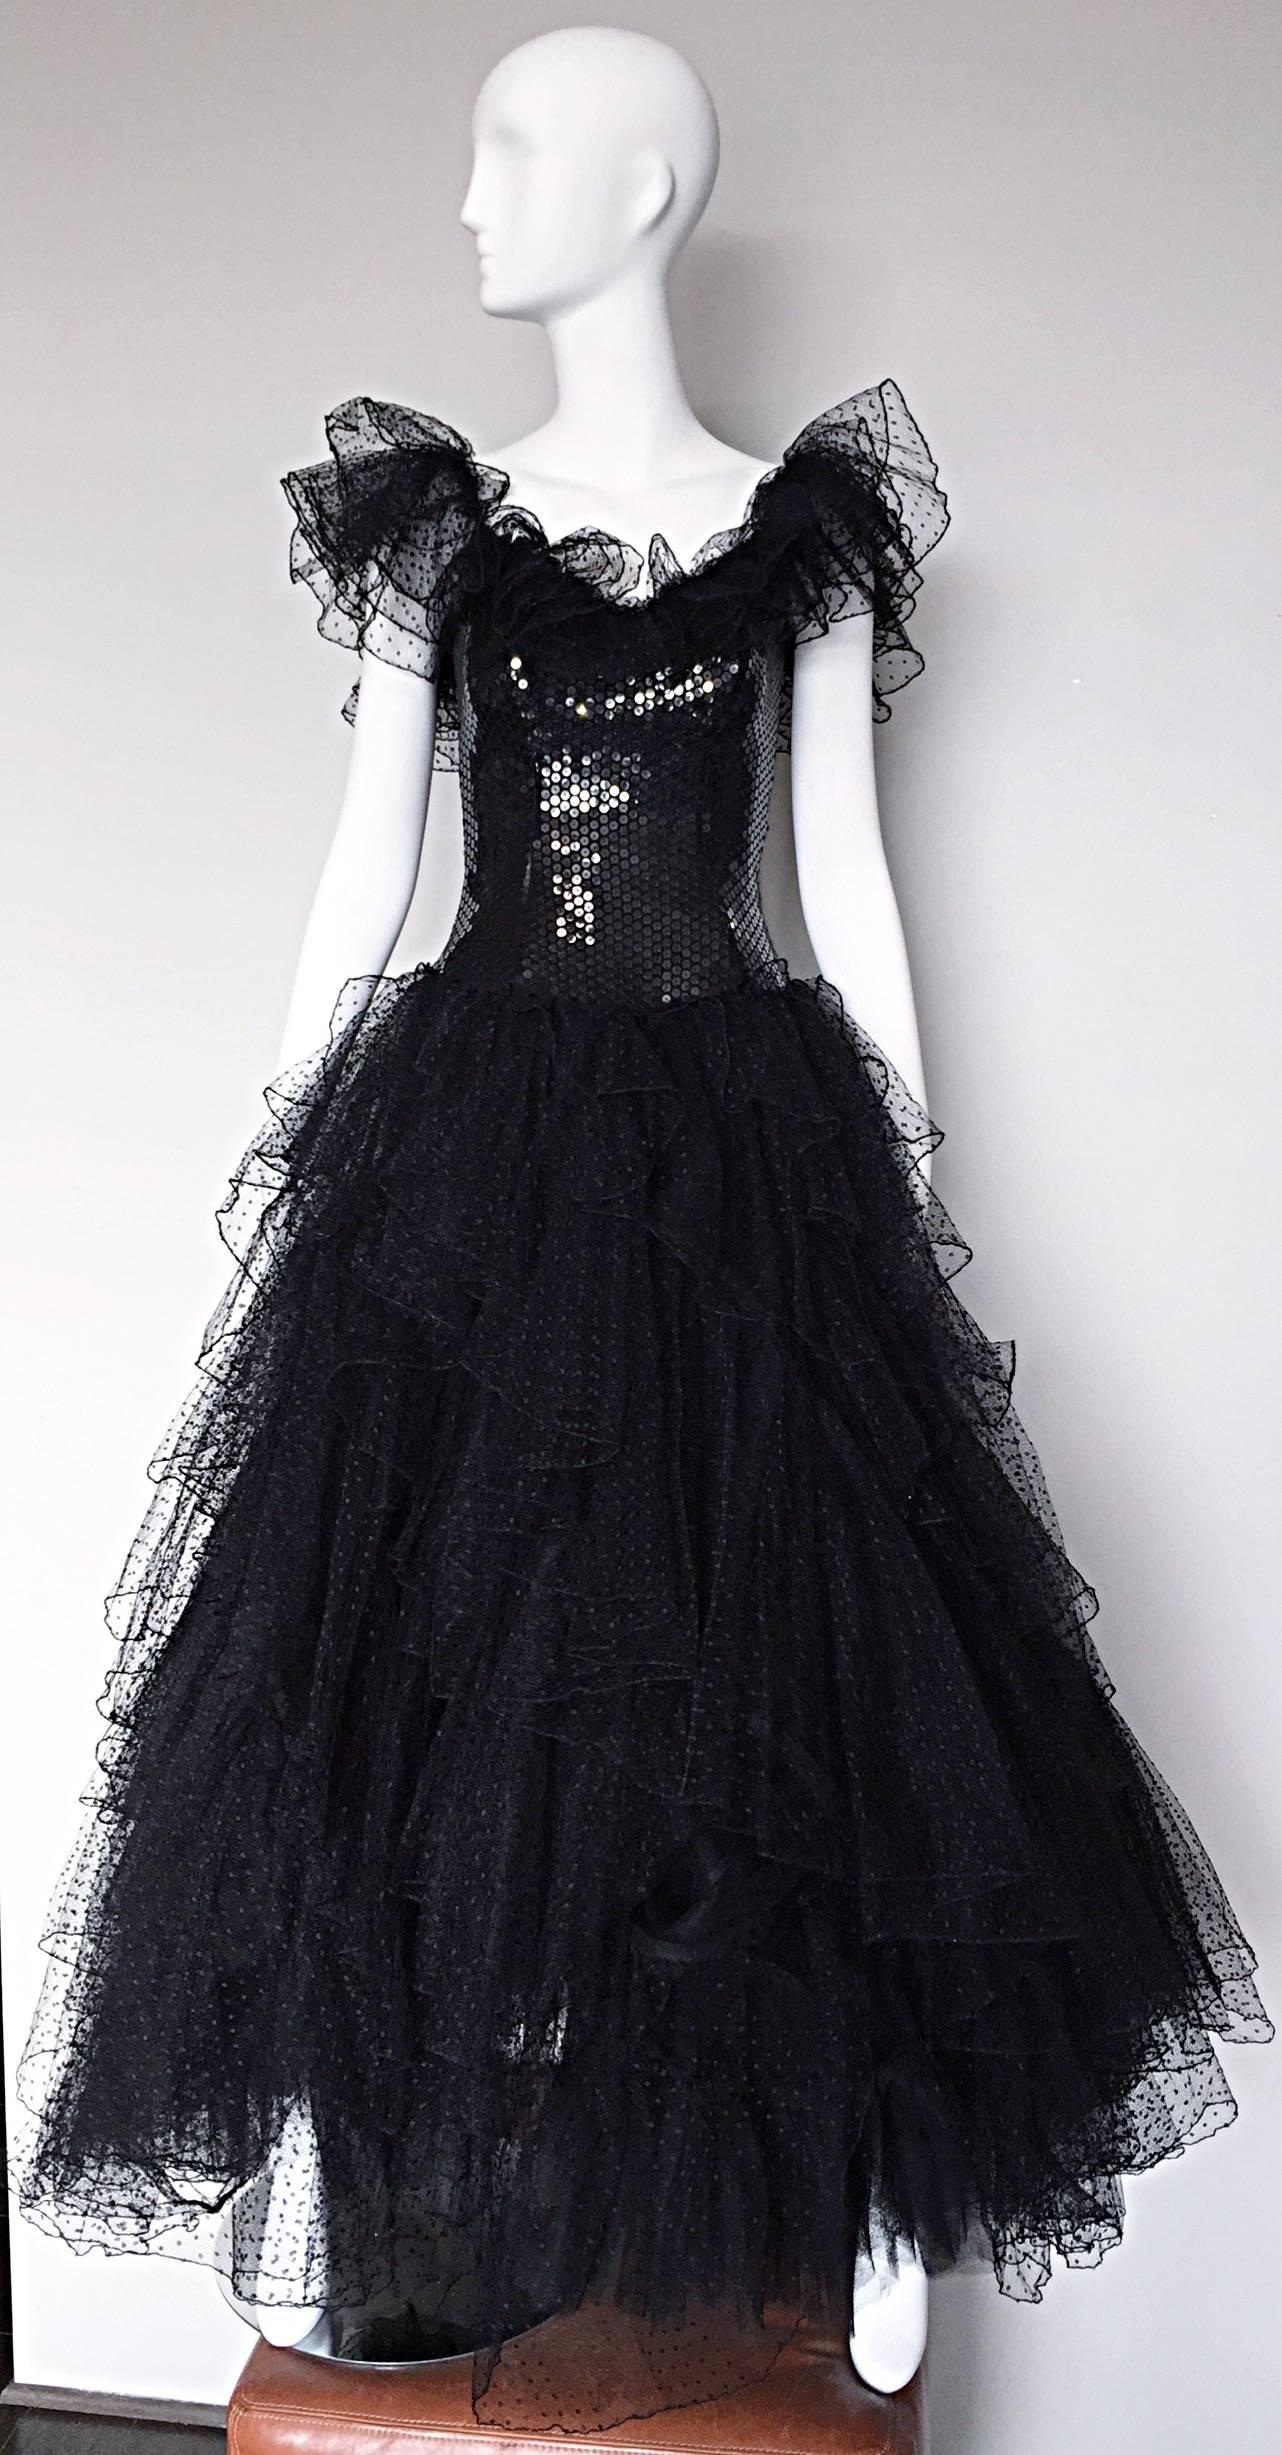 Stunning vintage 1980s DAVID FIELDEN black silk and tulle sequin Avant Garde evening dress! Features layers and layers of black embroidered tulle on the skirt, with dramatic matching sleeves. Form fitting black sequined boned bodice, with an